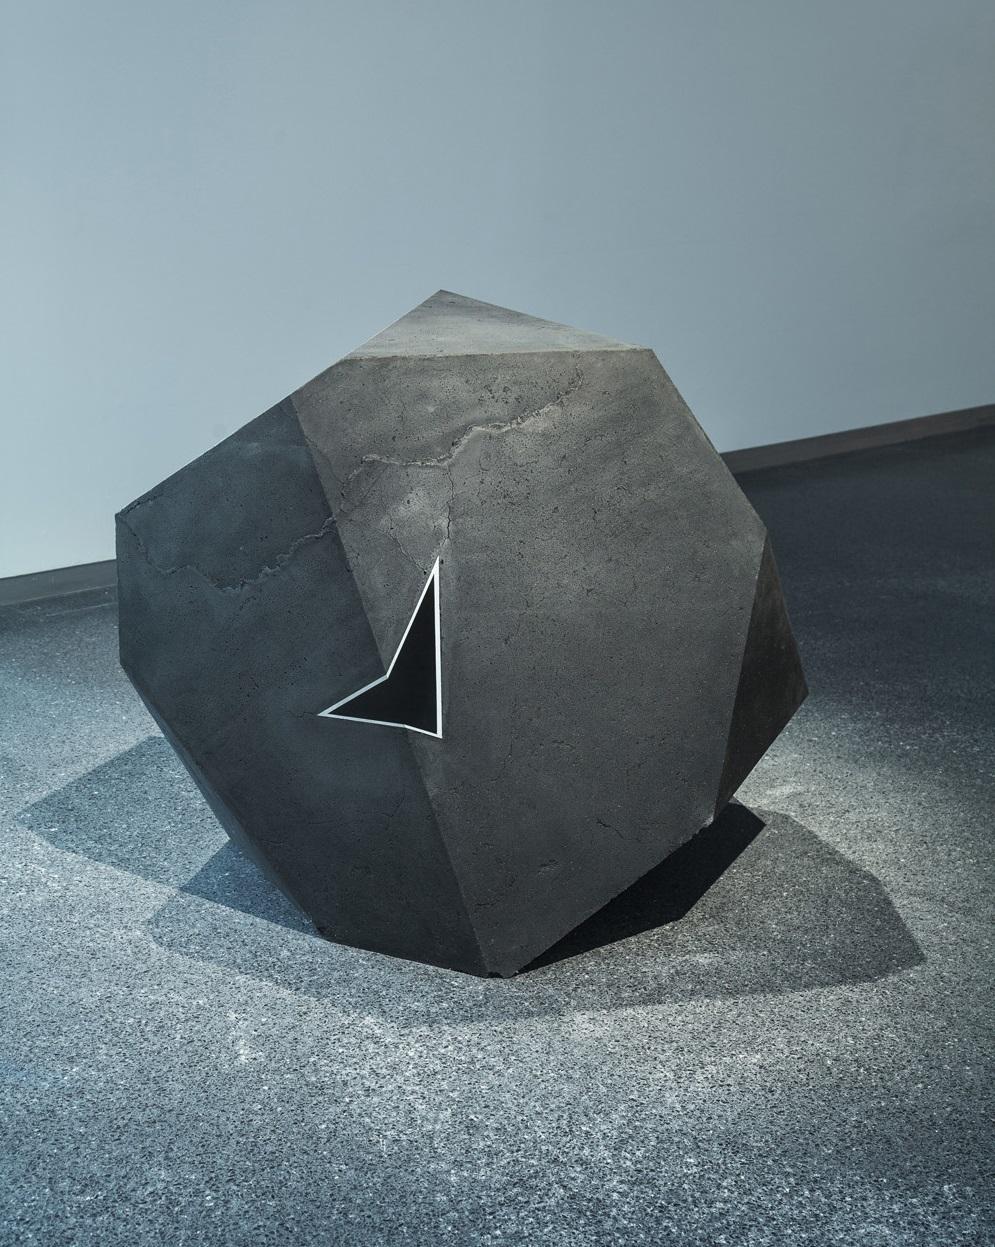 Carbon Void Aluminium is a sculpture by contemporary artist Tom Price. This sculpture is made of coal, aluminium and Jesmonite, dimensions are 100 × 100 × 100 cm (39.4 × 39.4 × 39.4 in). 
This artwork is available on commission. It will be created